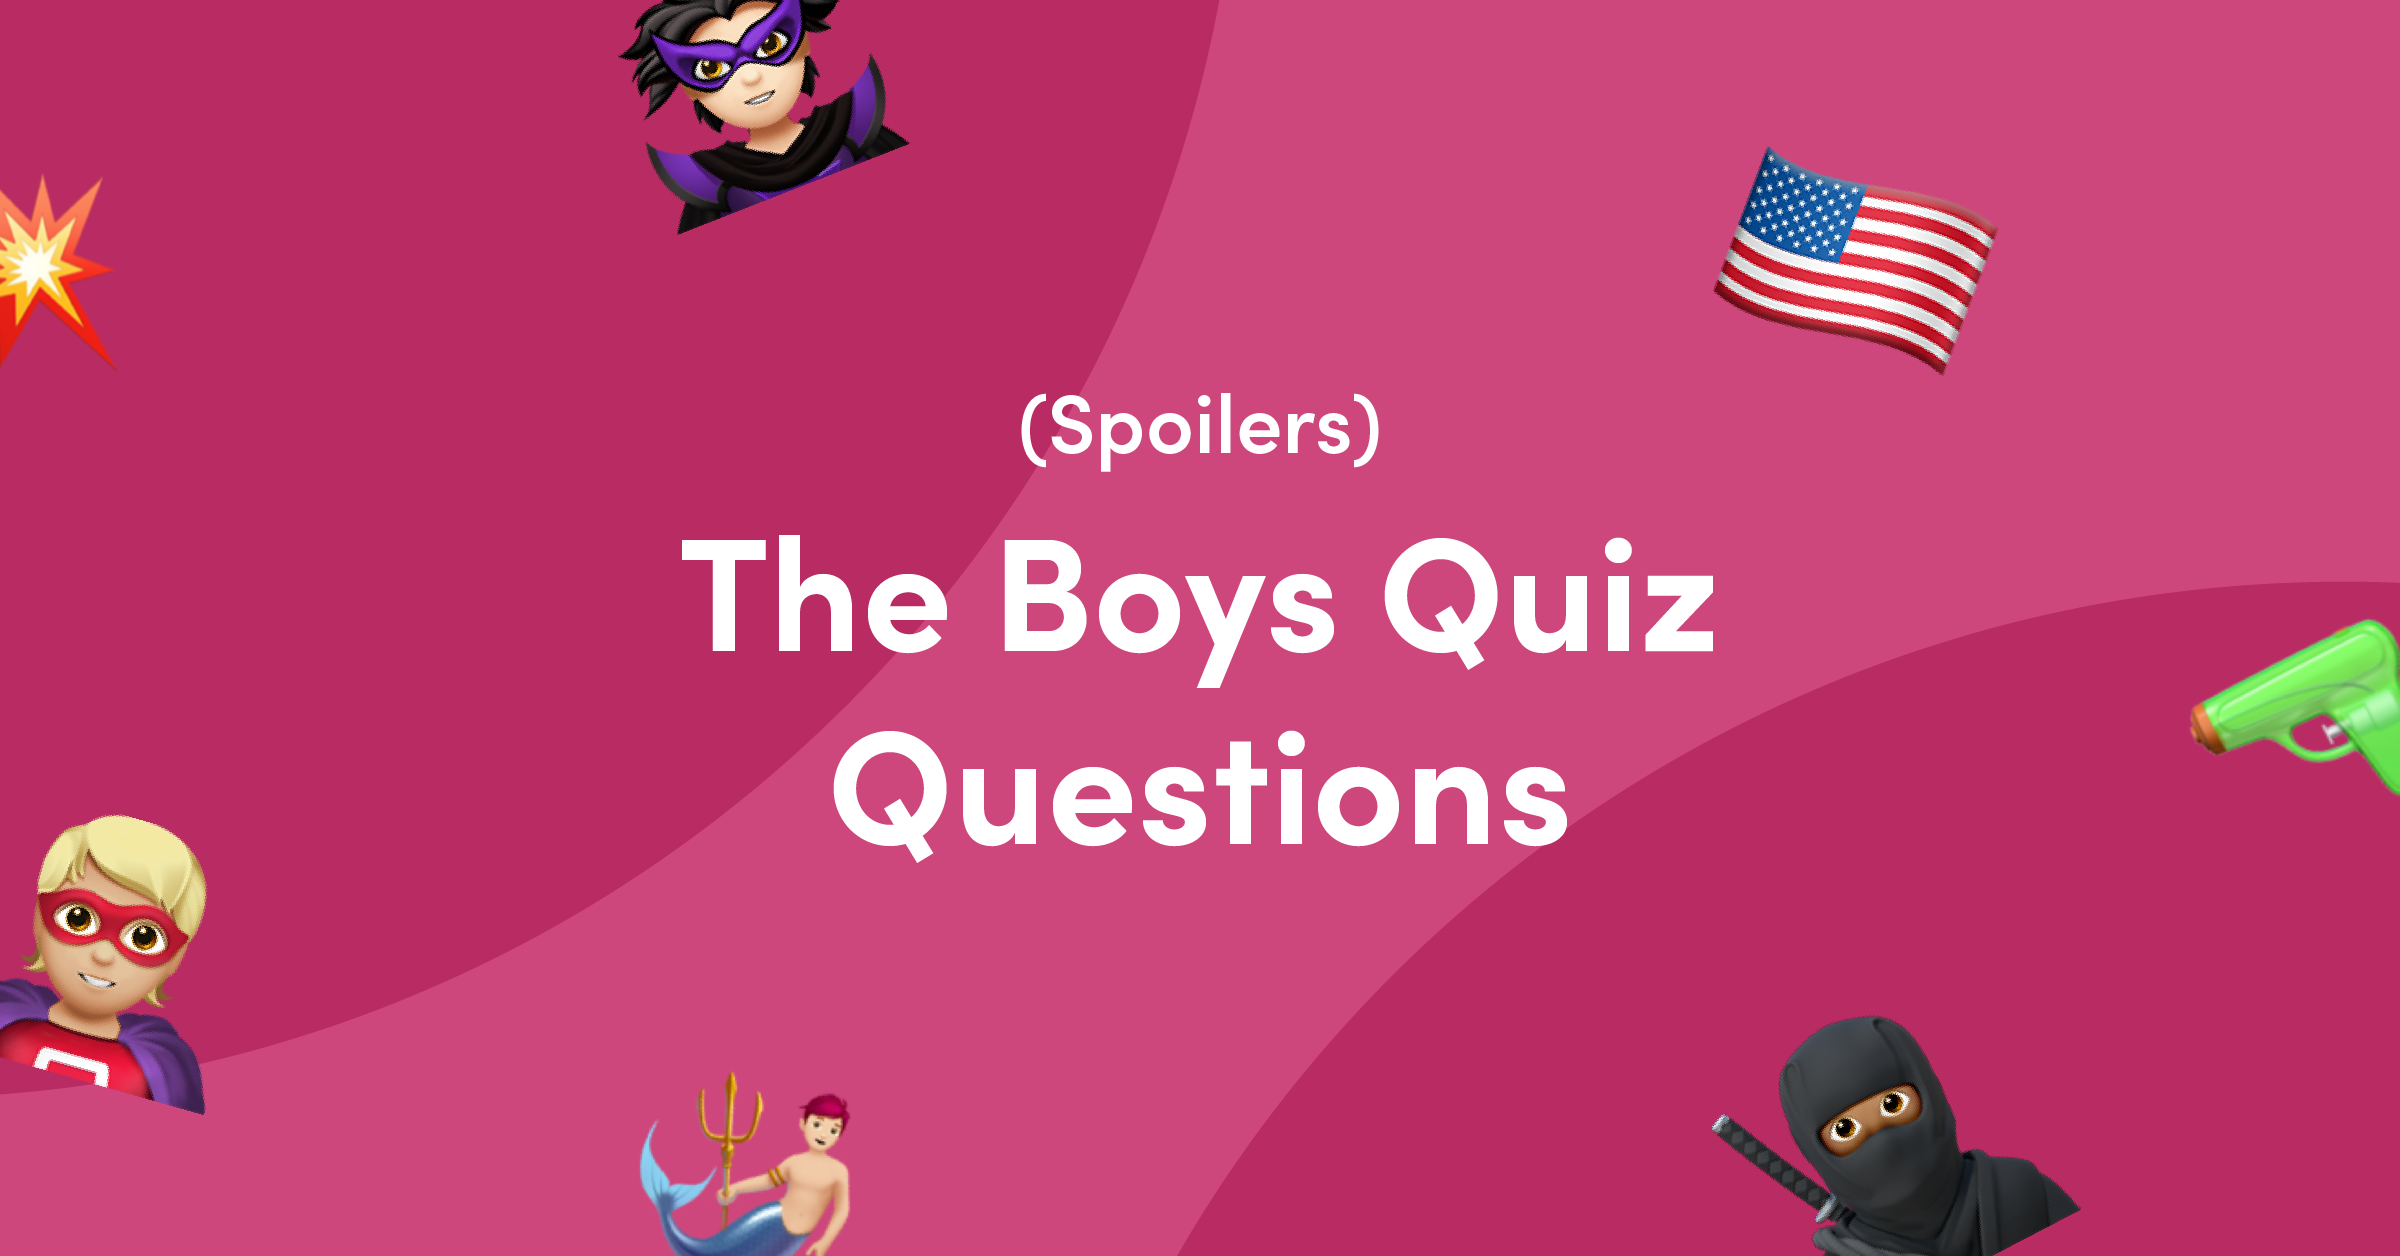 Emojis on pink background for The Boys quiz questions and answers